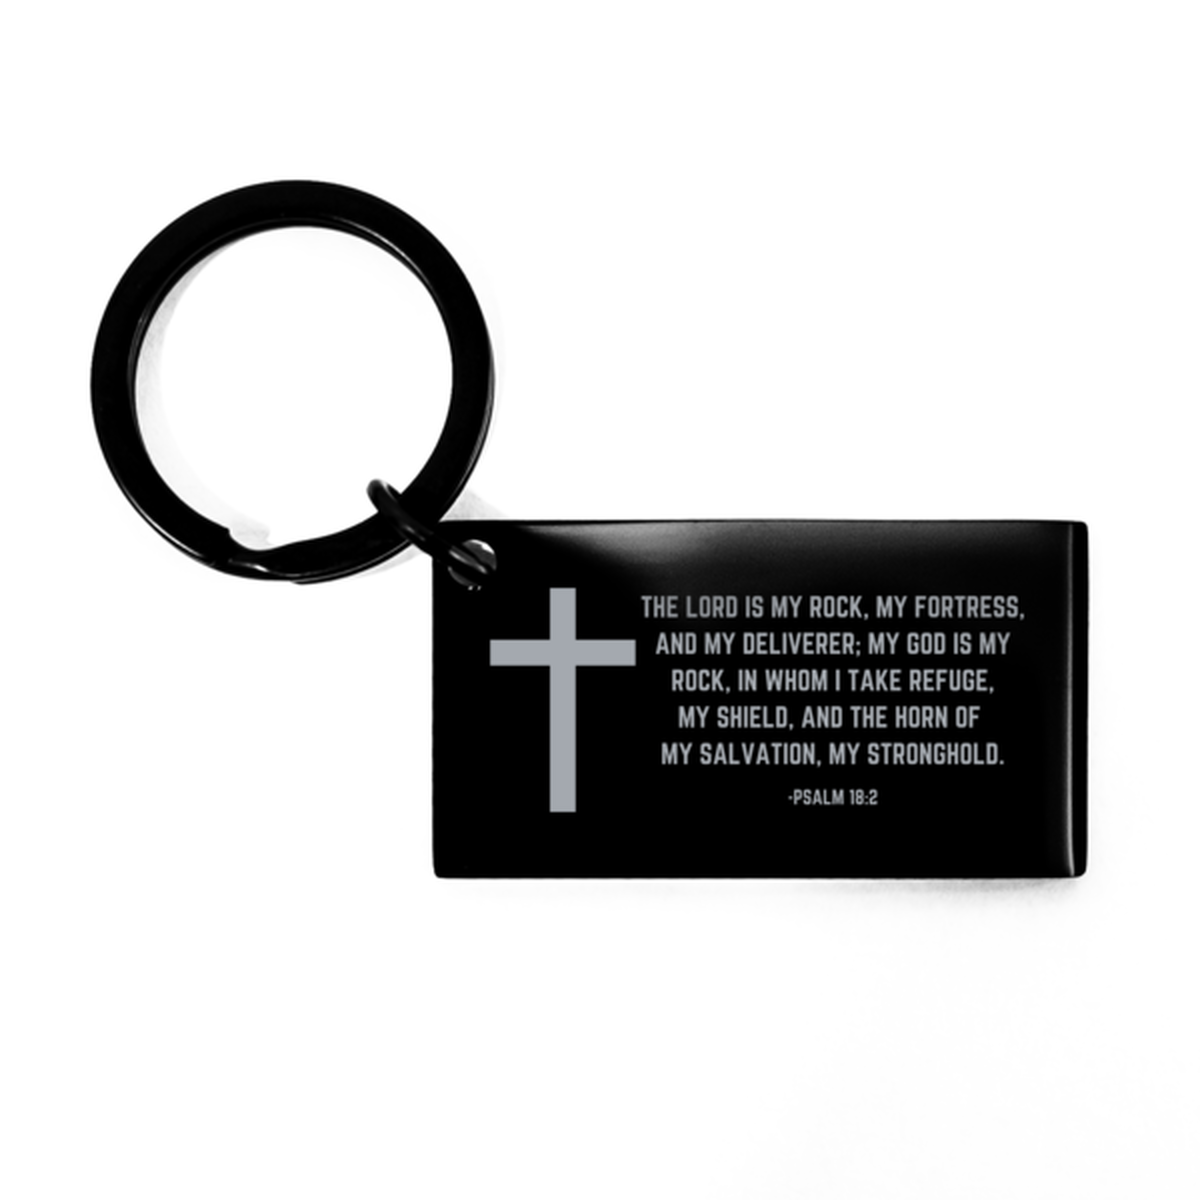 Baptism Gifts For Teenage Boys Girls, Christian Bible Verse Black Keychain, The Lord is my rock, Confirmation Gifts, Bible Verse Keyring for Son, Godson, Grandson, Nephew